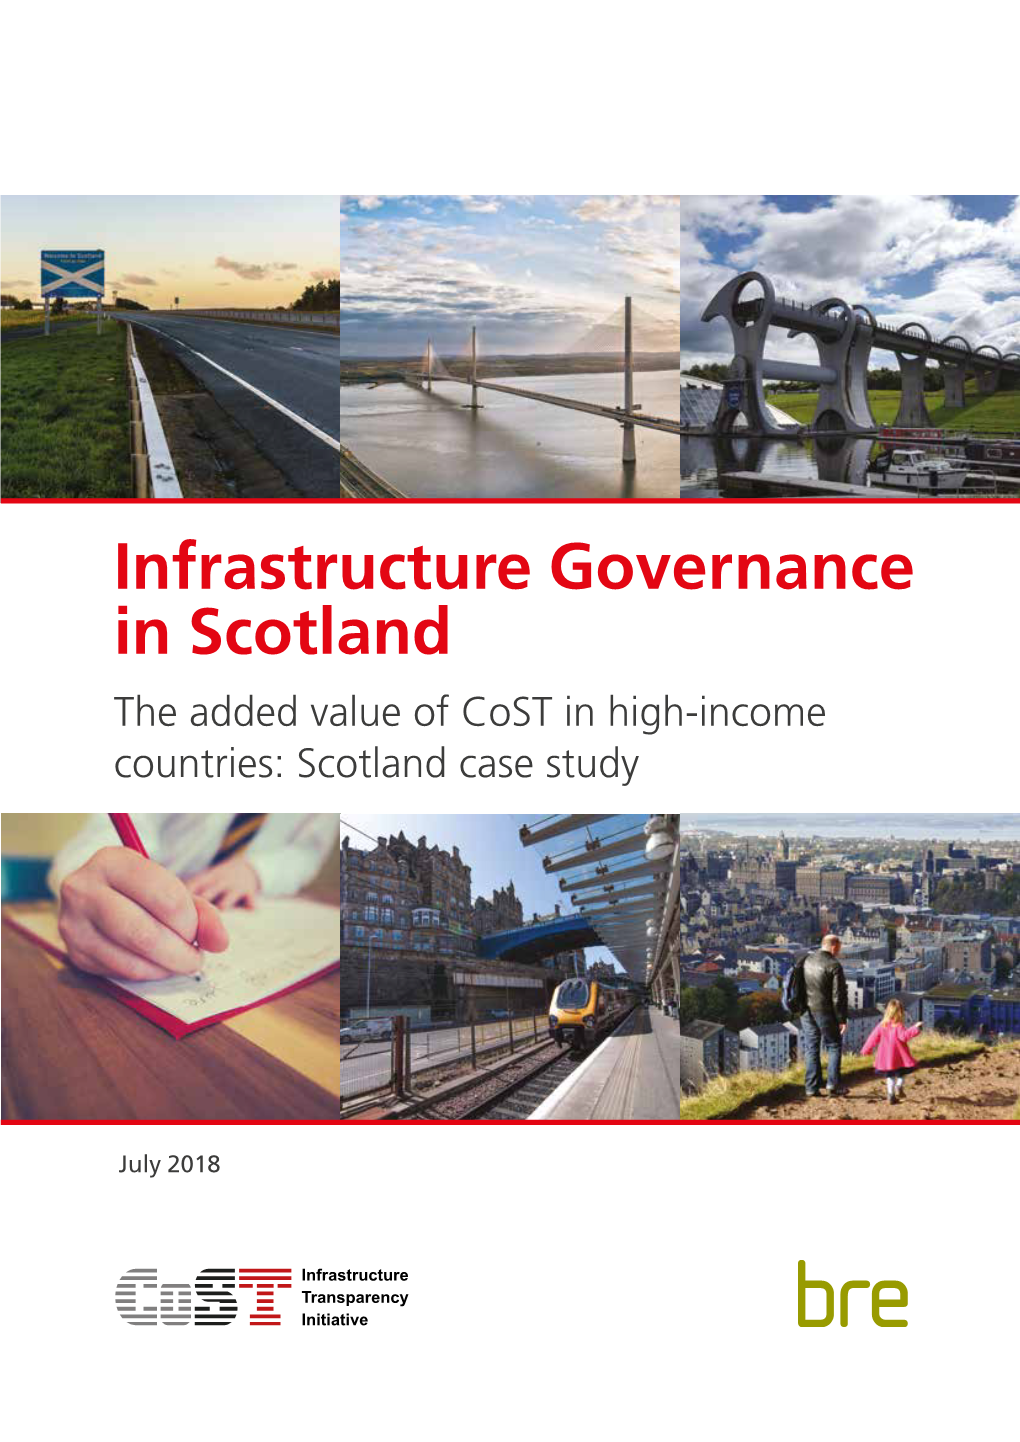 Case Study on Infrastructure Governance in Scotland